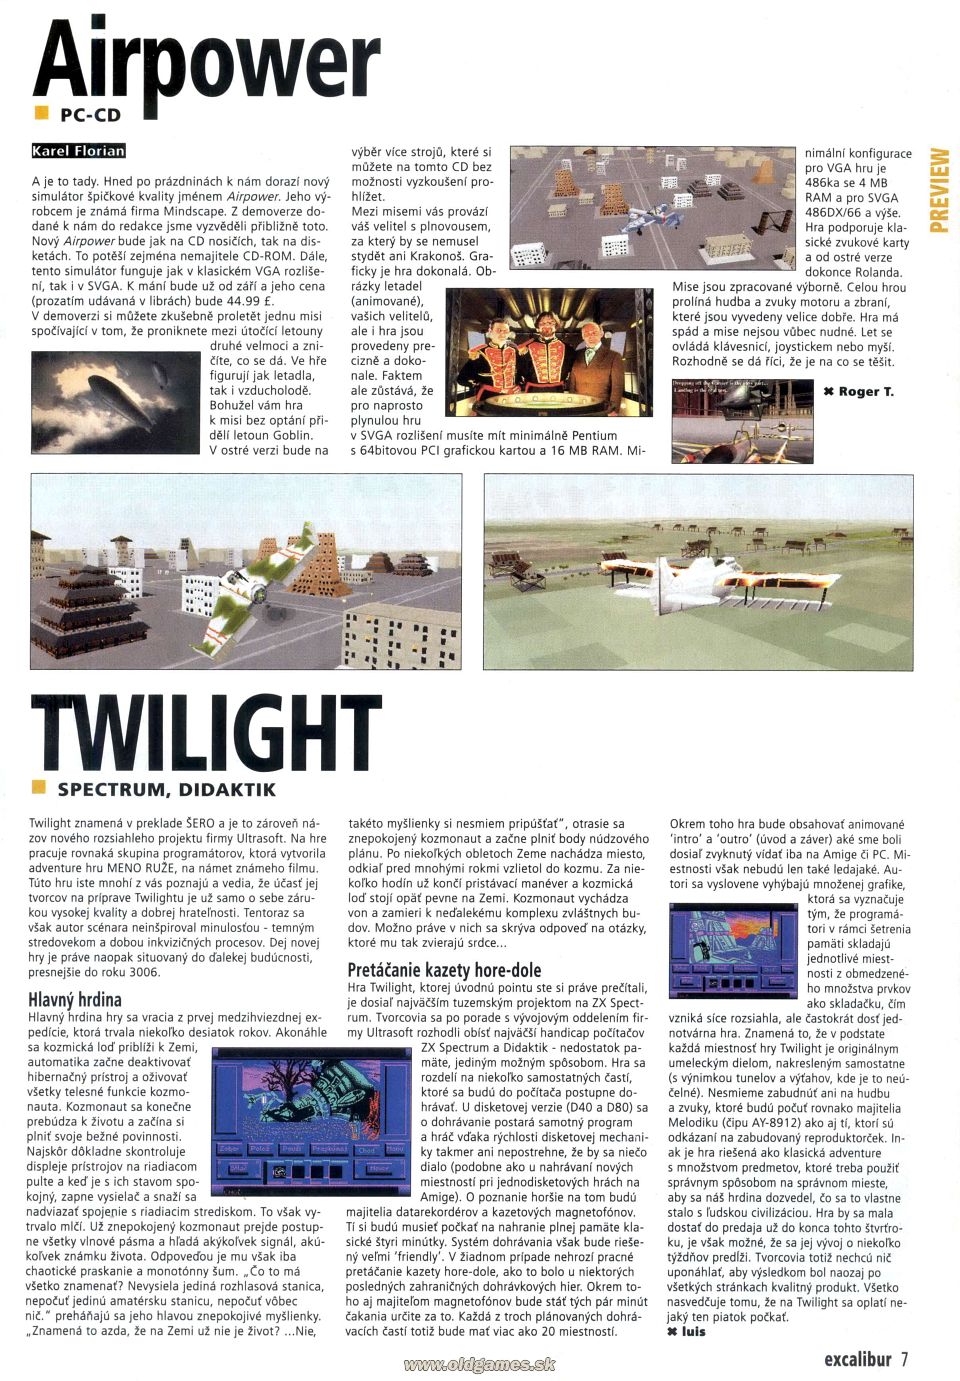 Airpower, Twilight - Preview